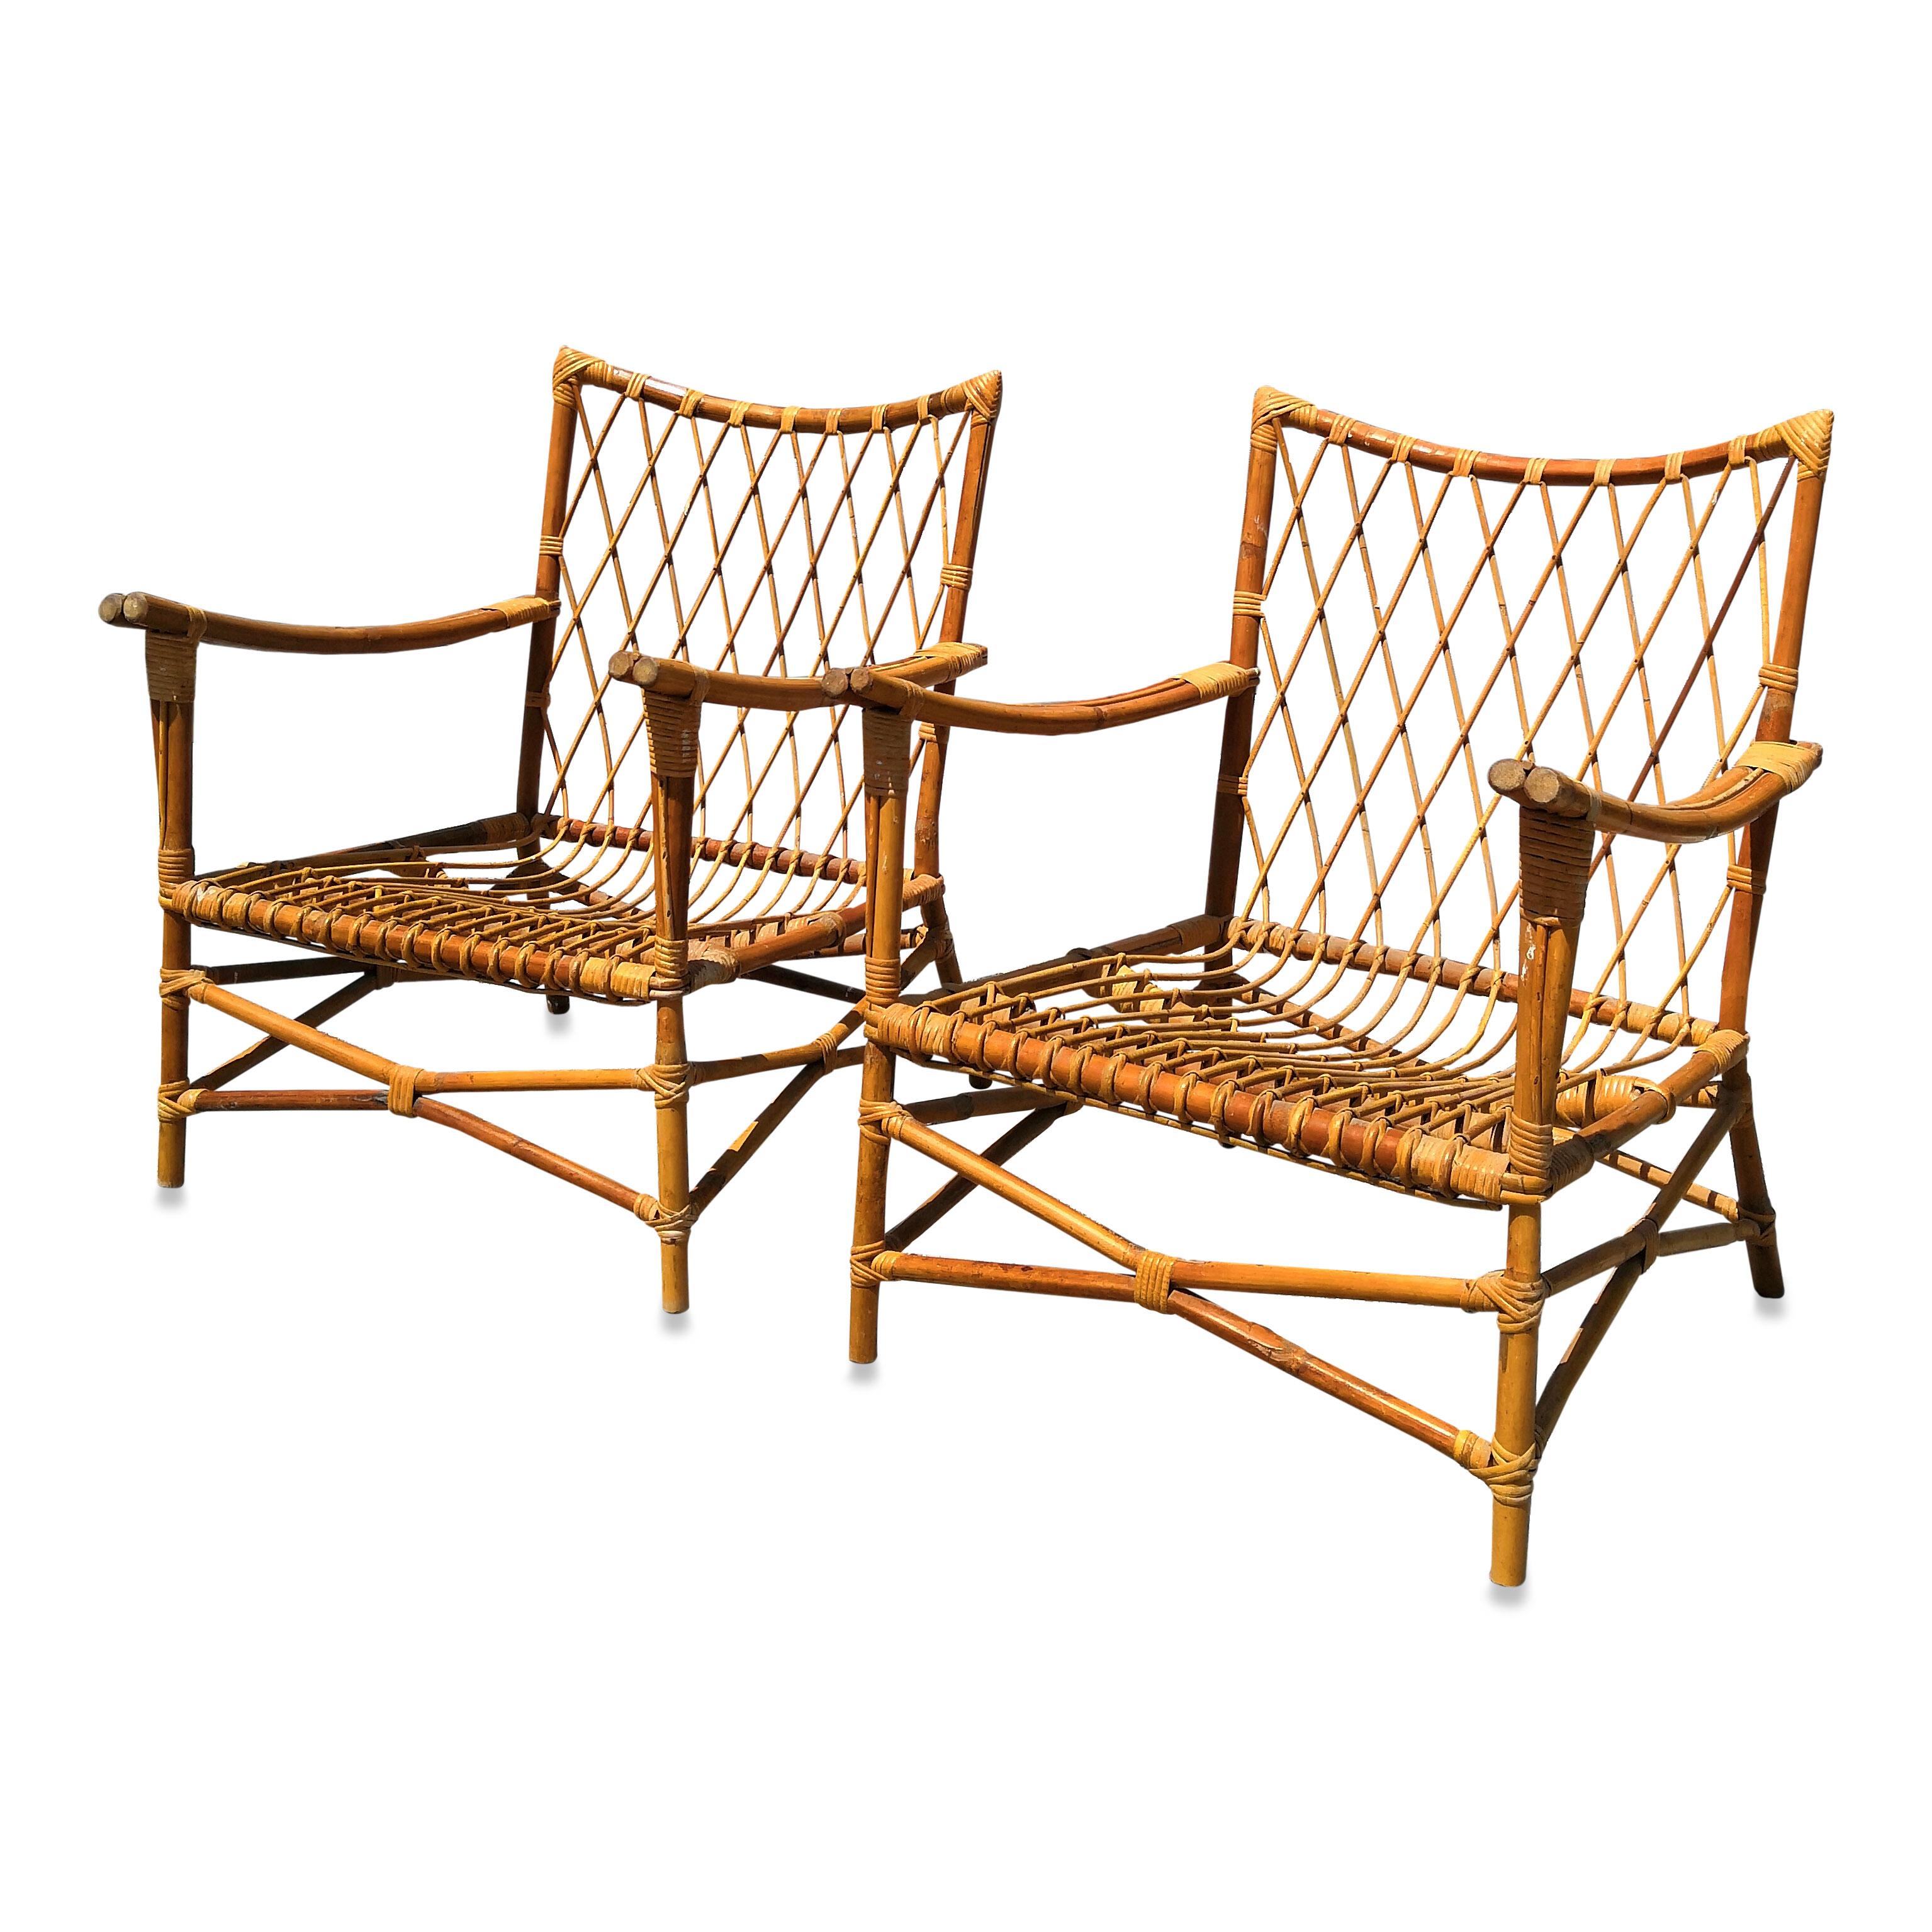 Pair of Bamboo and Rattan Armchairs, France, 1960s (Mitte des 20. Jahrhunderts)